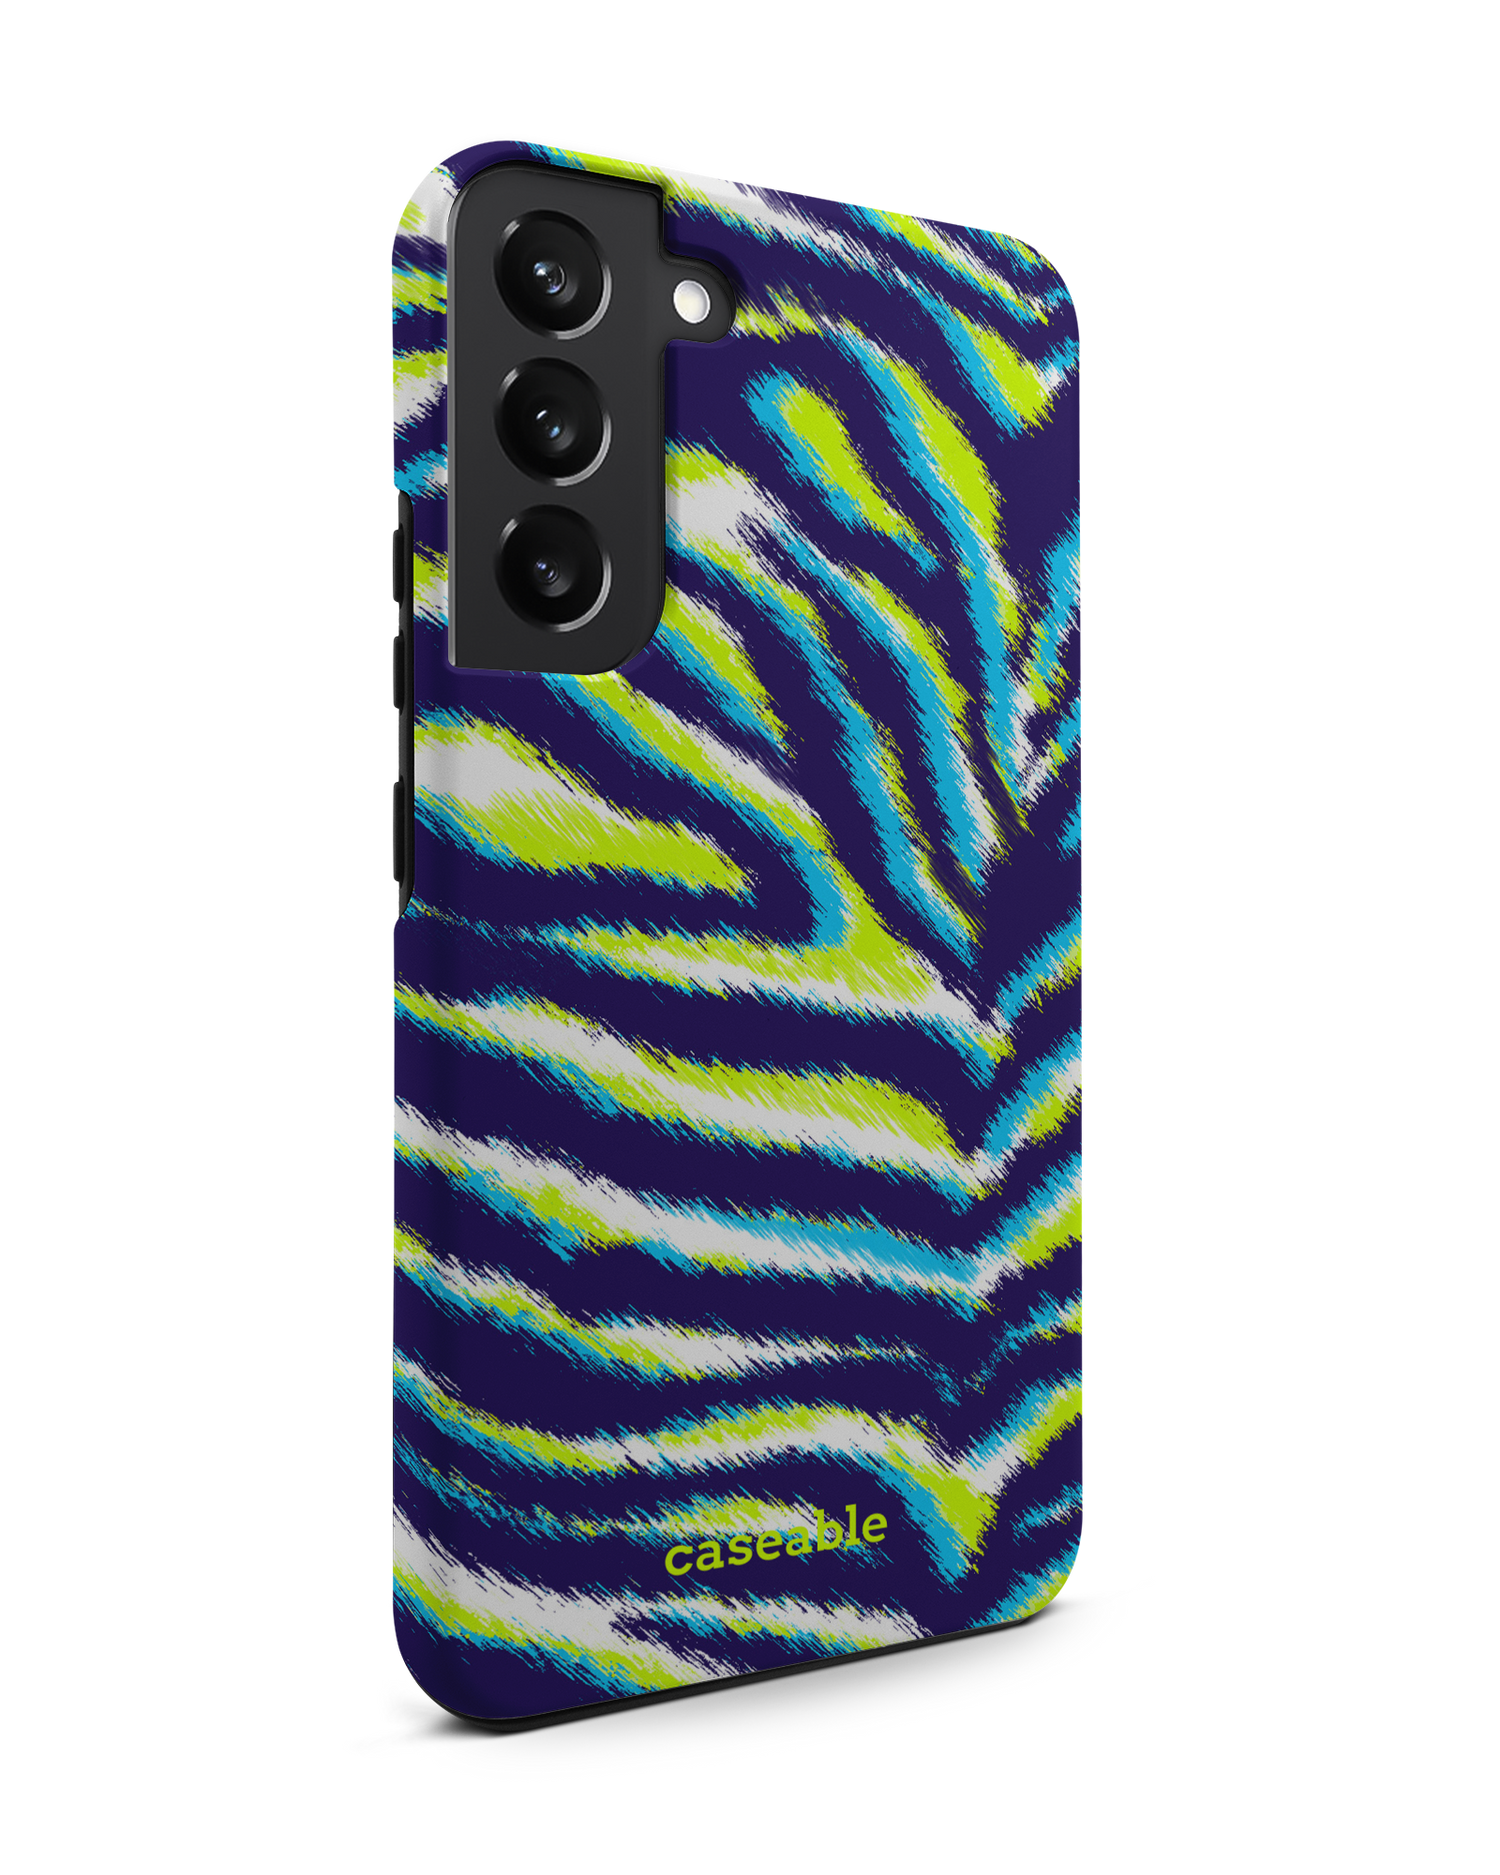 Neon Zebra Premium Phone Case Samsung Galaxy S22 Plus 5G: View from the left side